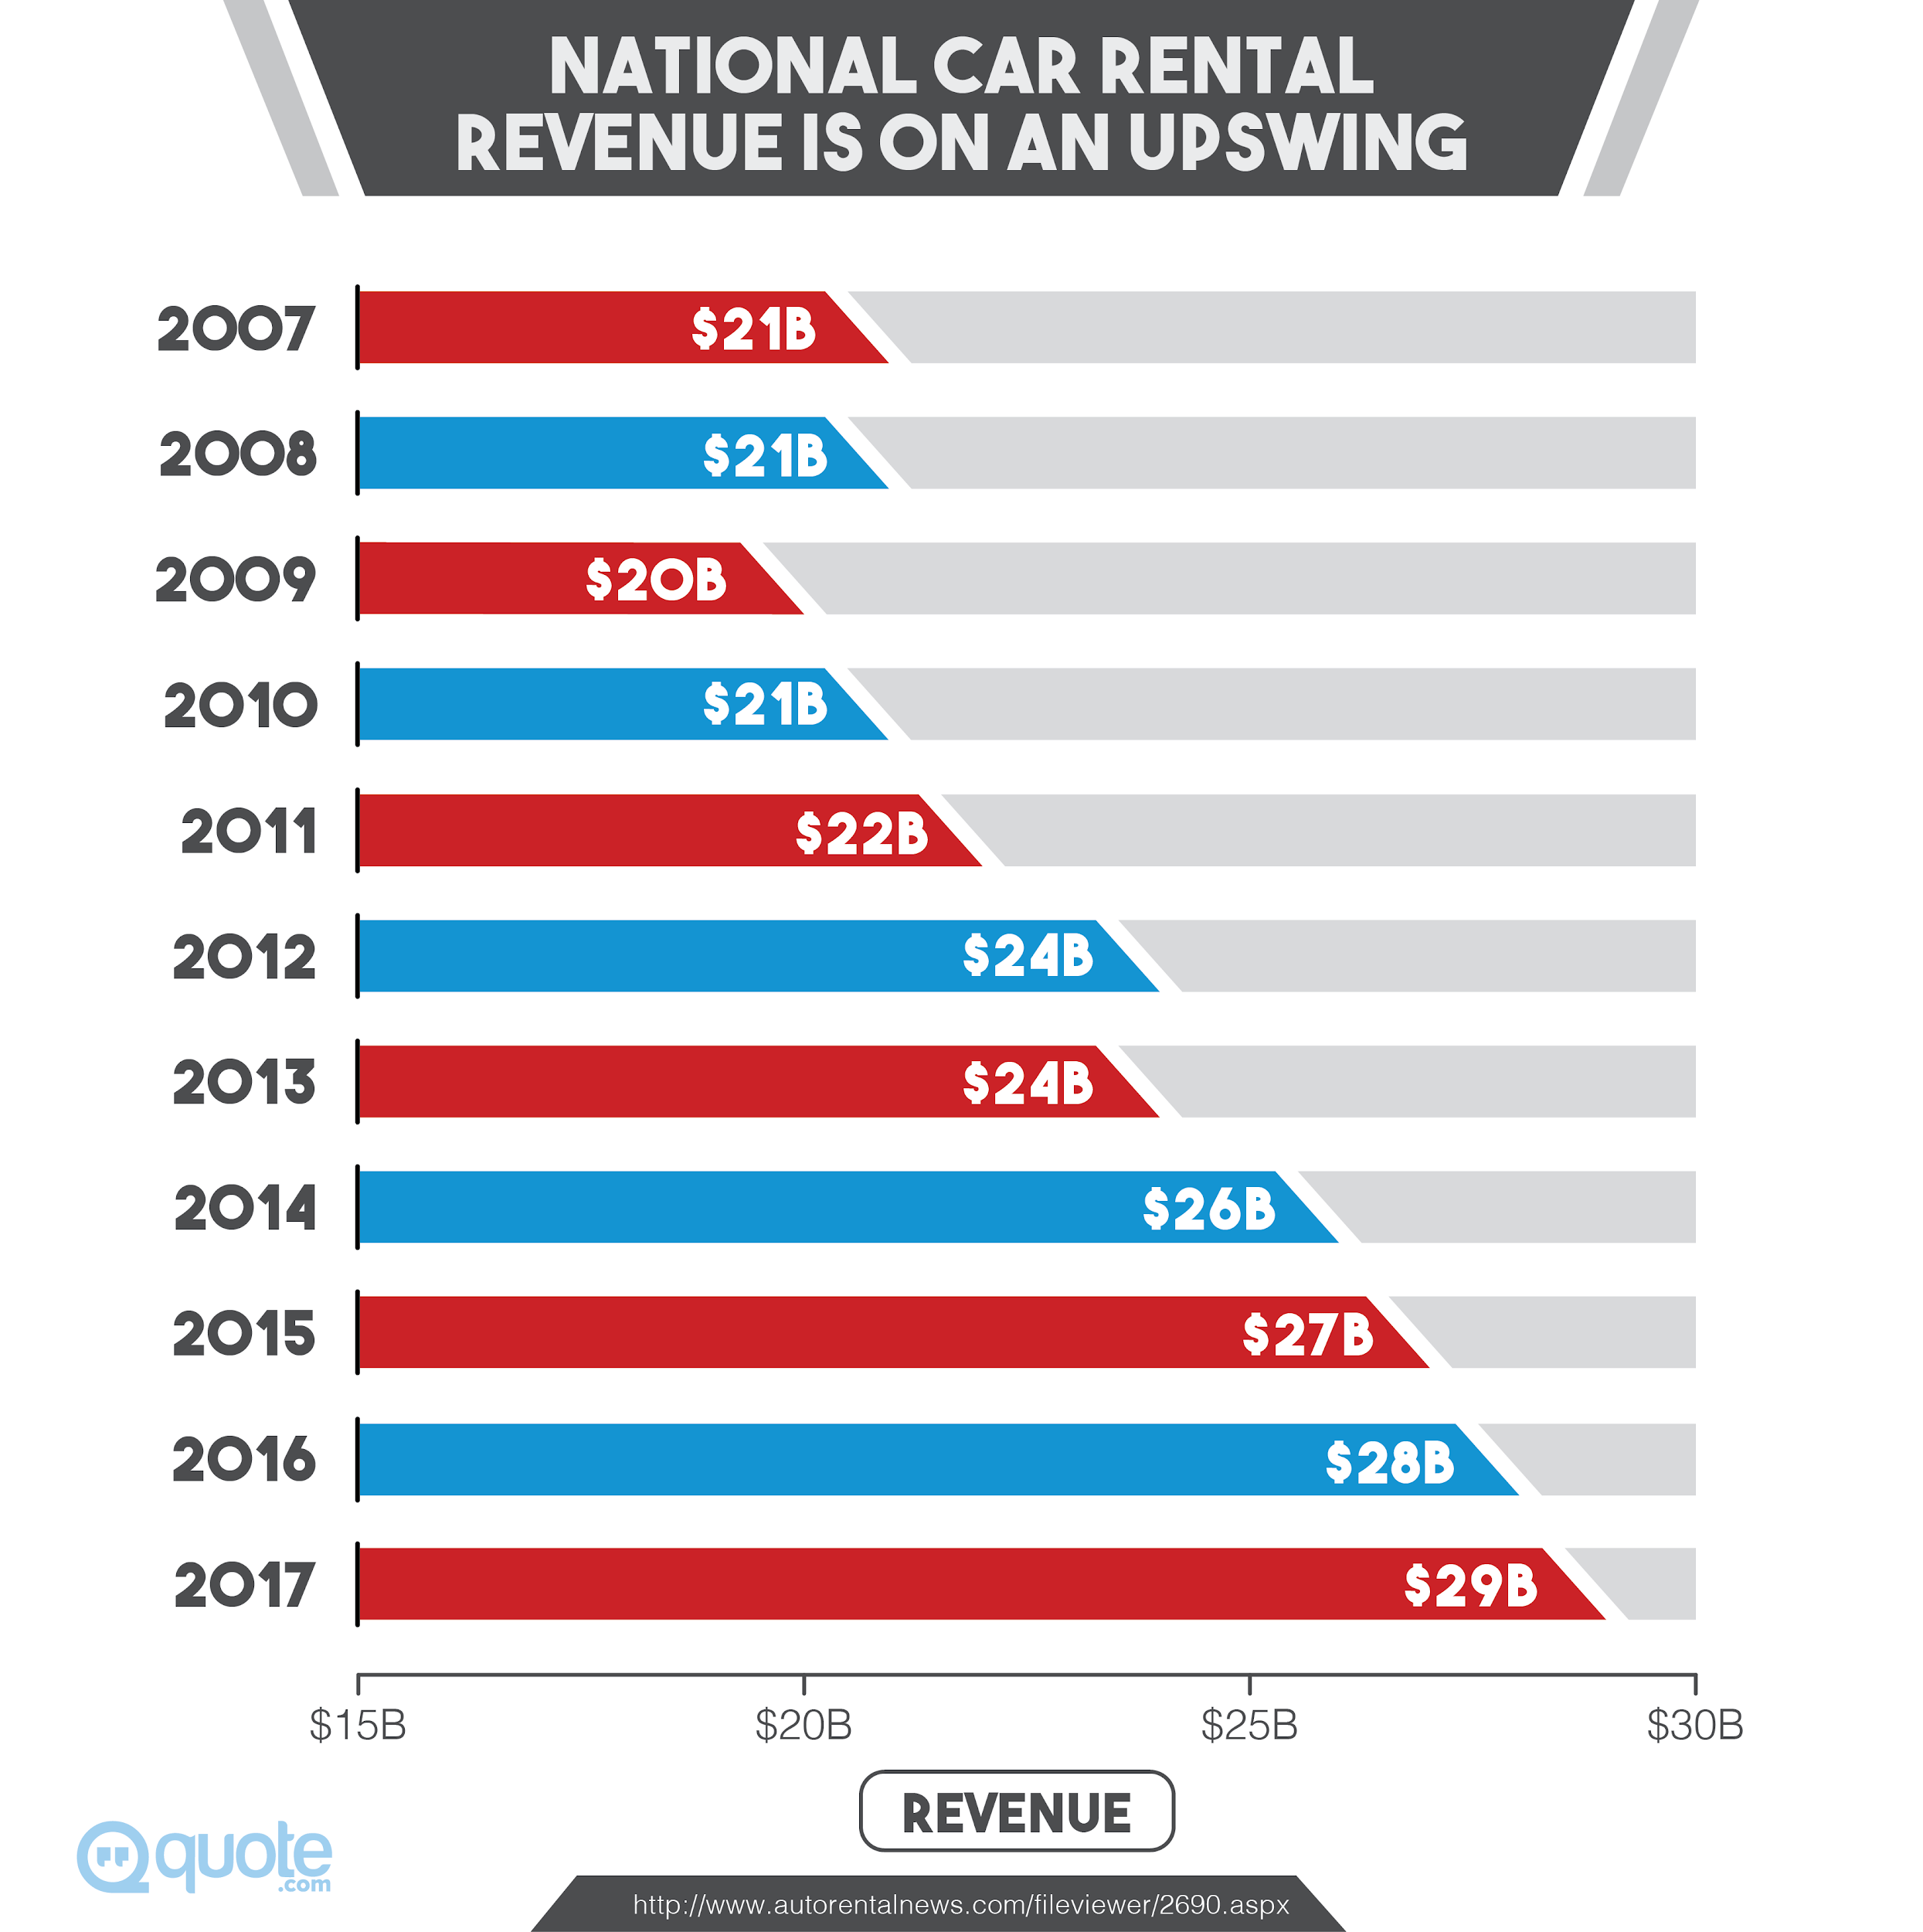 National Car Rental Revenue is on an Upswing from 2007-2017